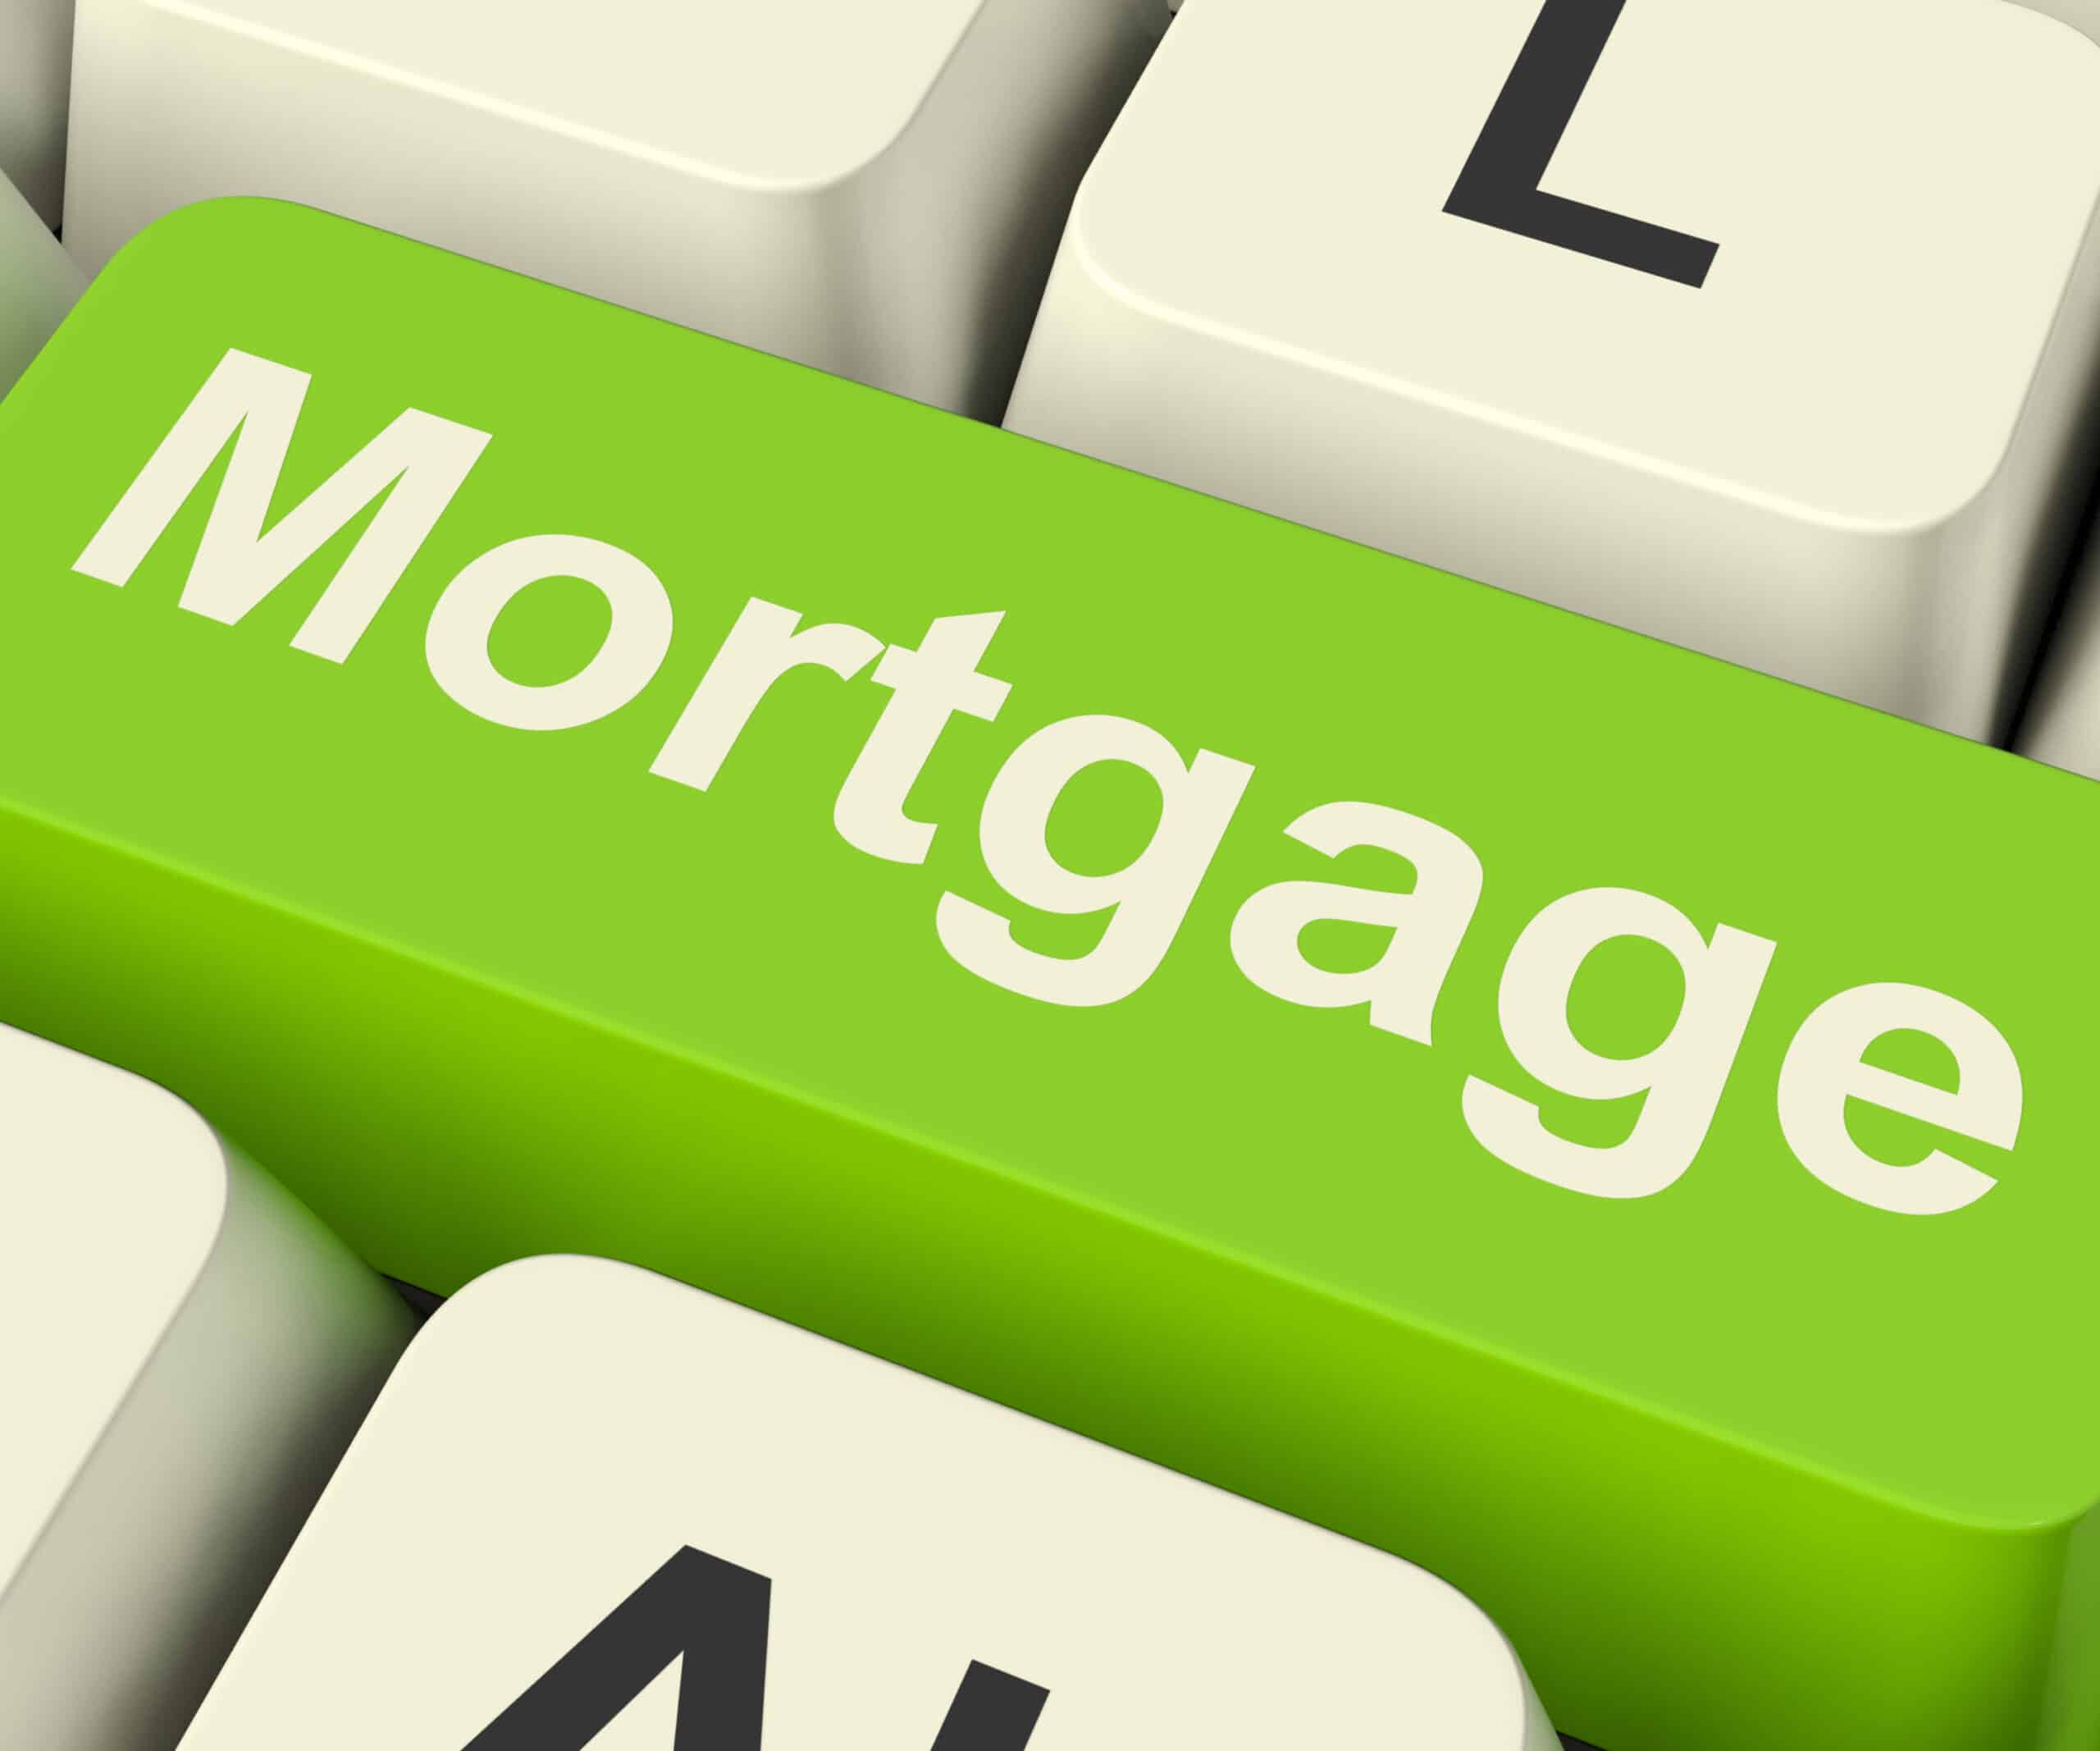 Can A Mortgage Be Revoked After Funding?